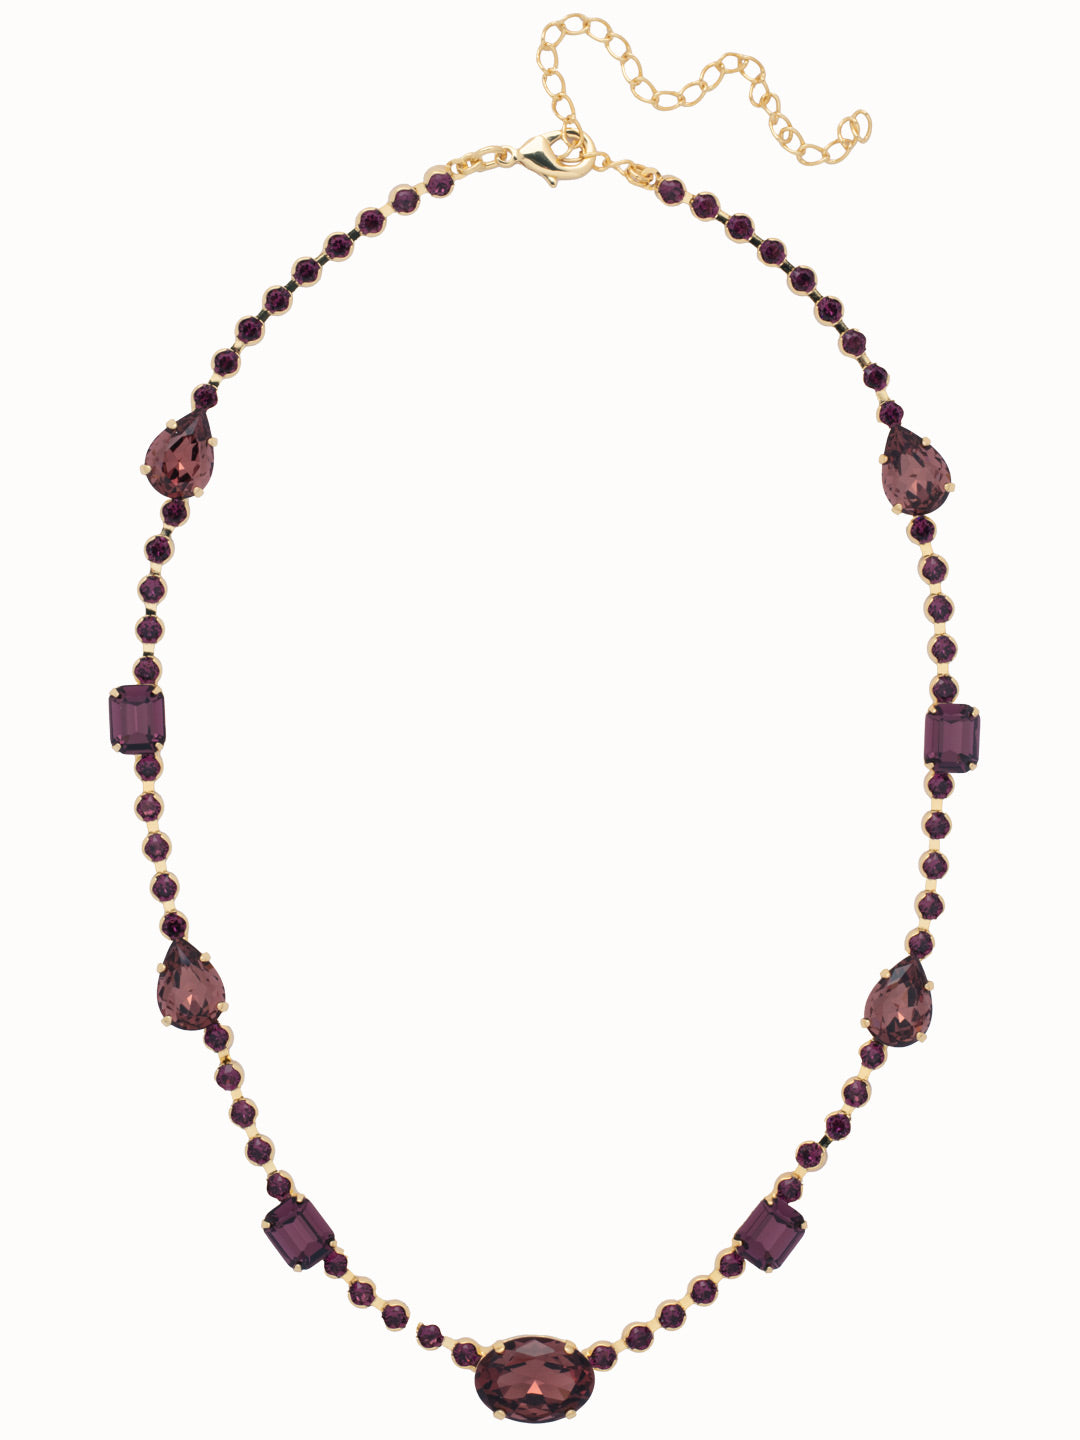 Grace Tennis Necklace - NFL99BGMRL - <p>The Grace Tennis Necklace features alternating pear, emerald, and oval cut crystals on an adjustable rhinestone chain, secured with a lobster claw clasp. From Sorrelli's Merlot collection in our Bright Gold-tone finish.</p>